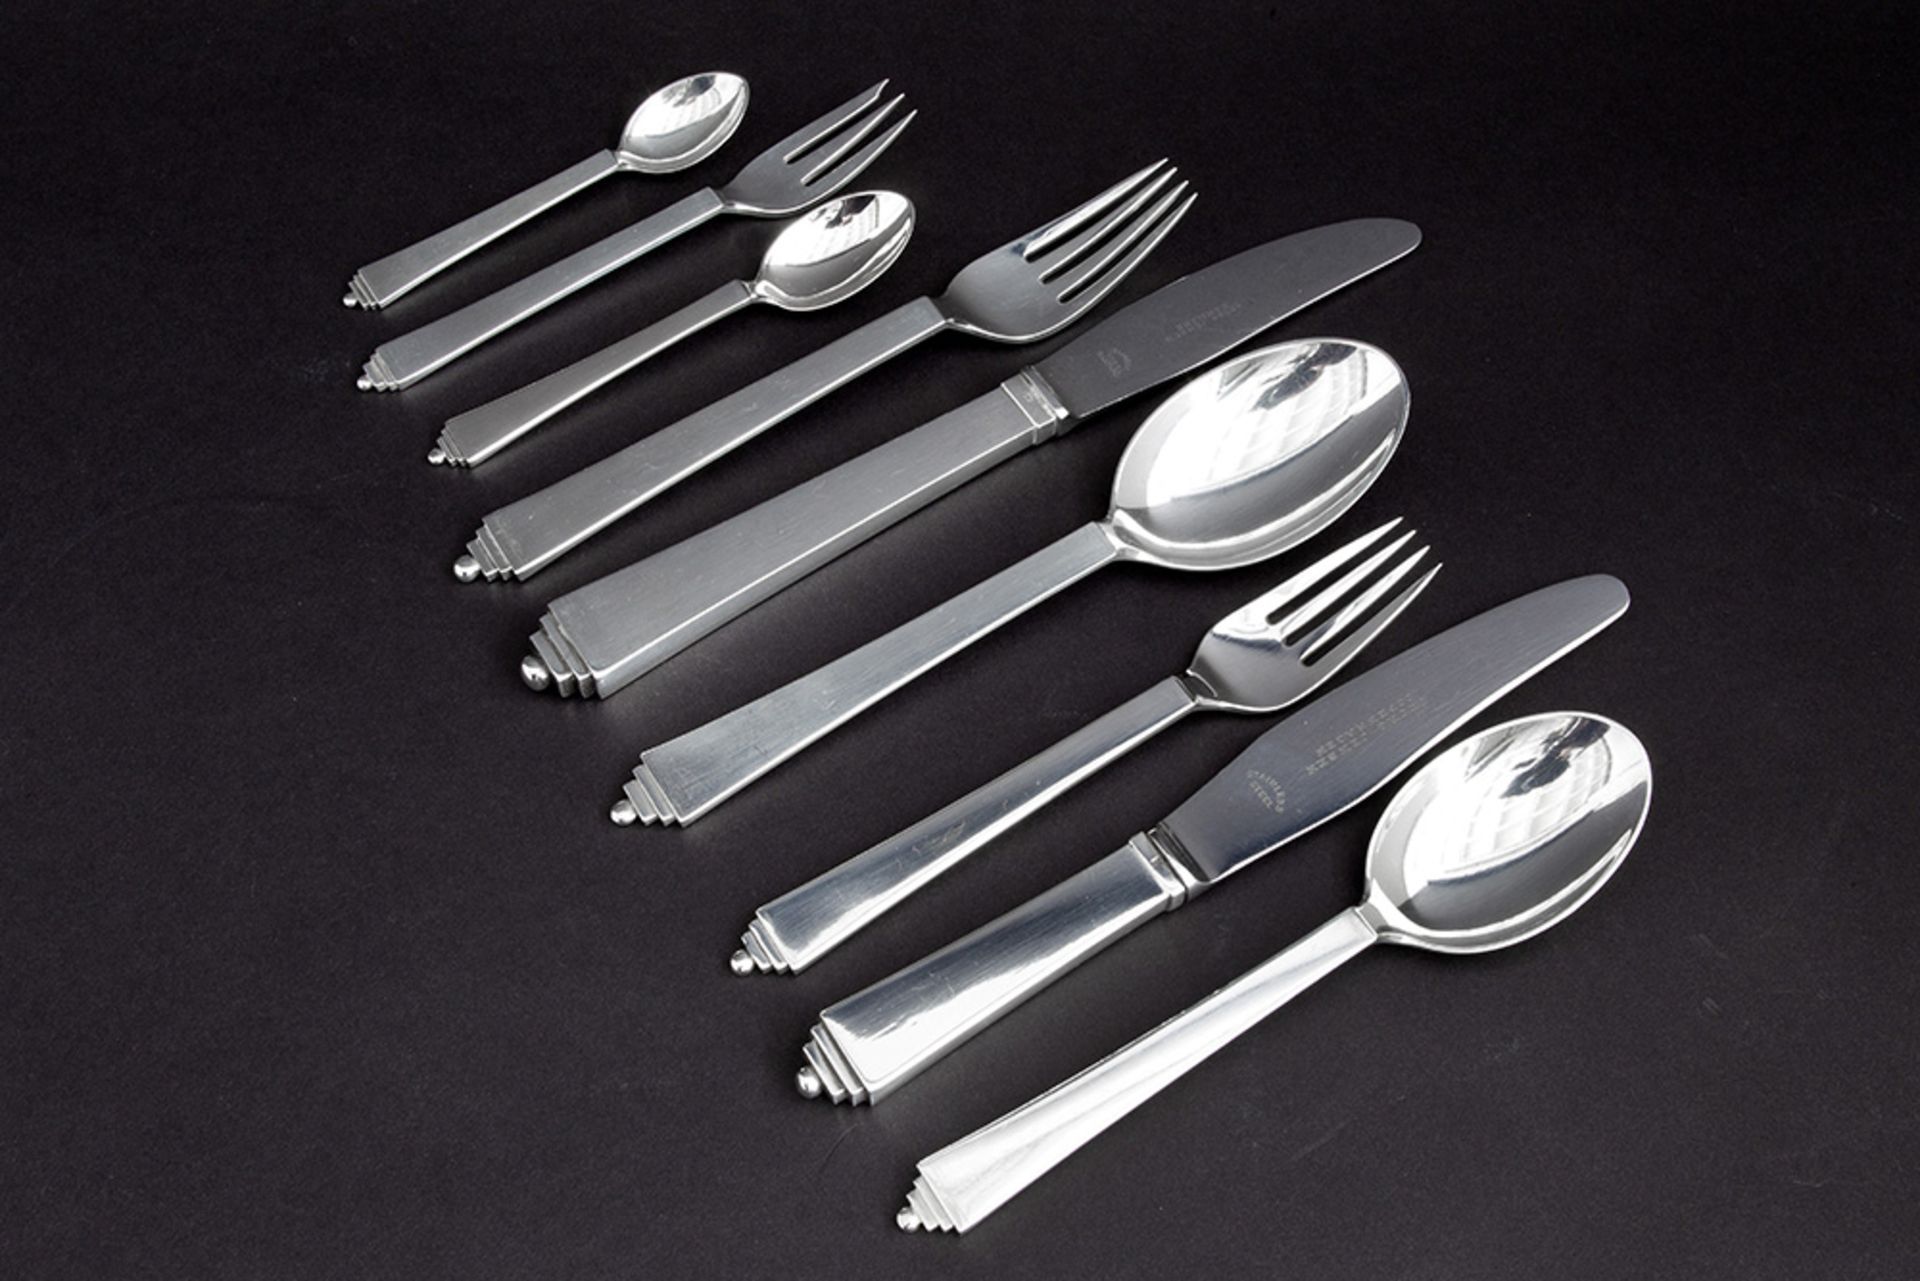 rare set of 54 pieces of Art Deco 'Pyramid' cutlery (design by Harald Nielsen) in marked silver (